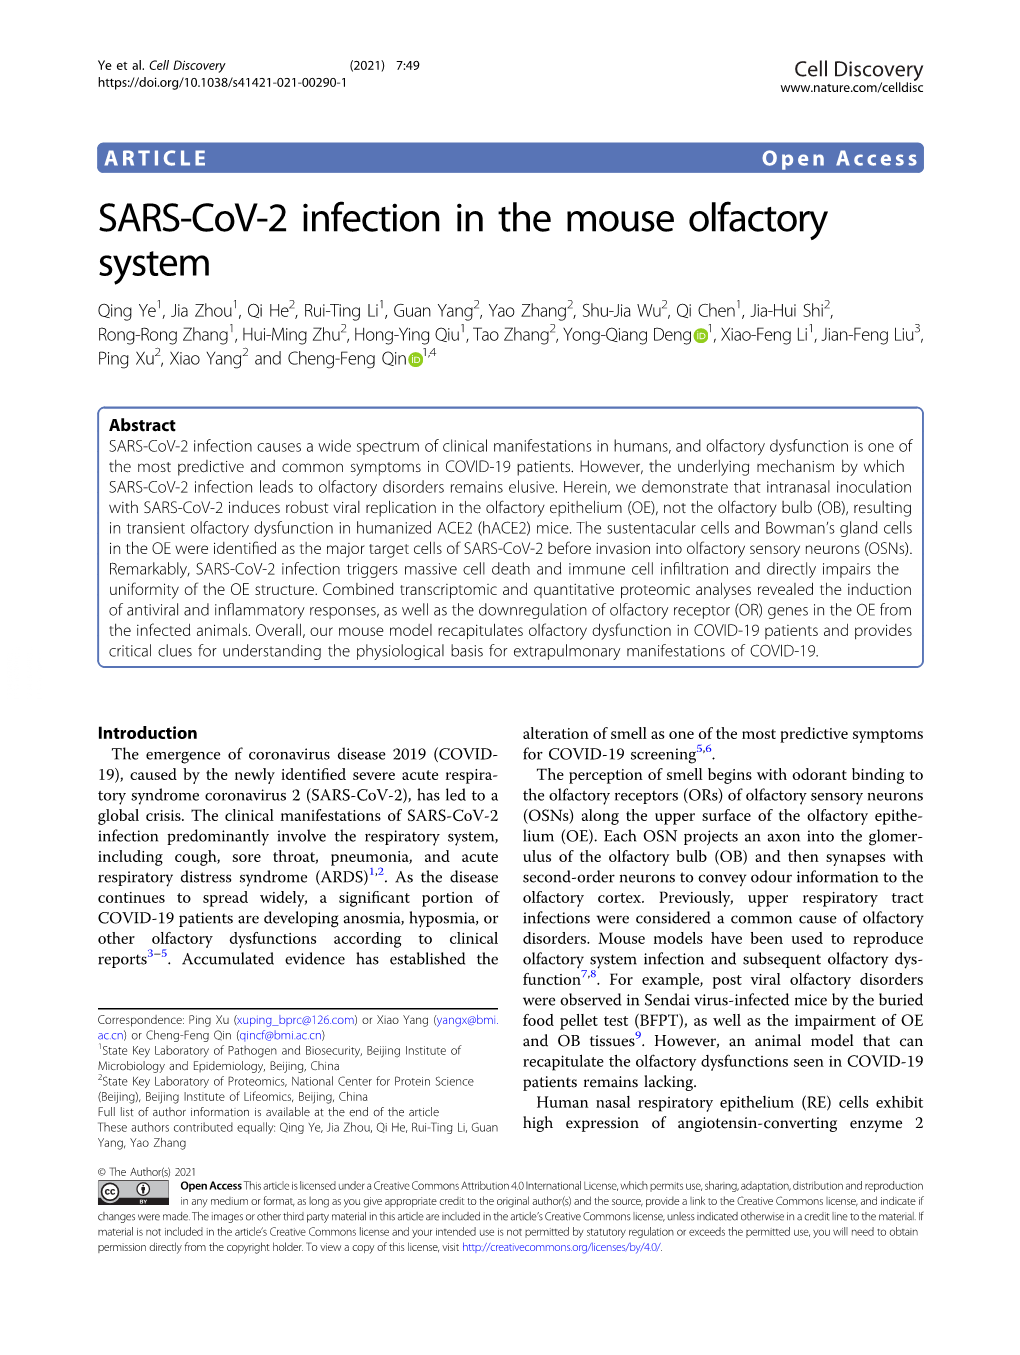 SARS-Cov-2 Infection in the Mouse Olfactory System